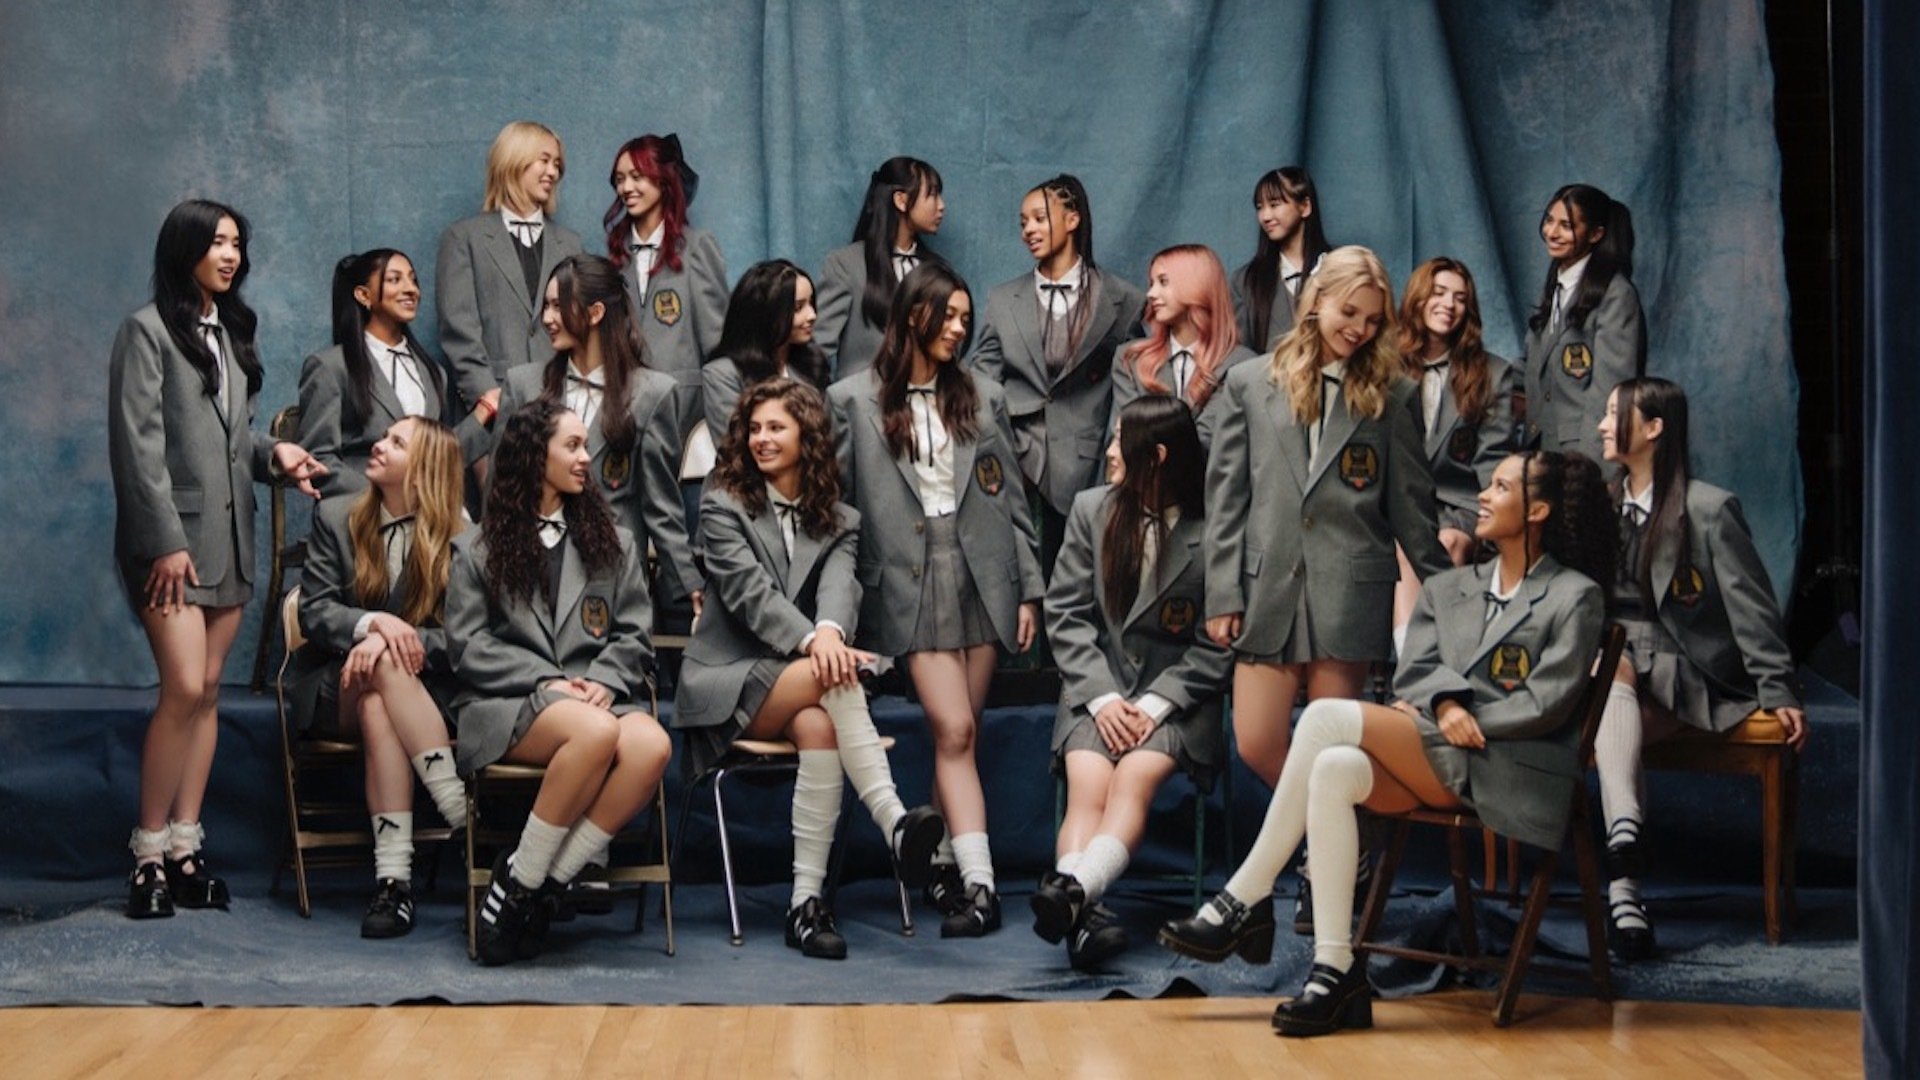 20 contestants in school uniforms pose for a promotional shot to advertise the search for a global girl group.